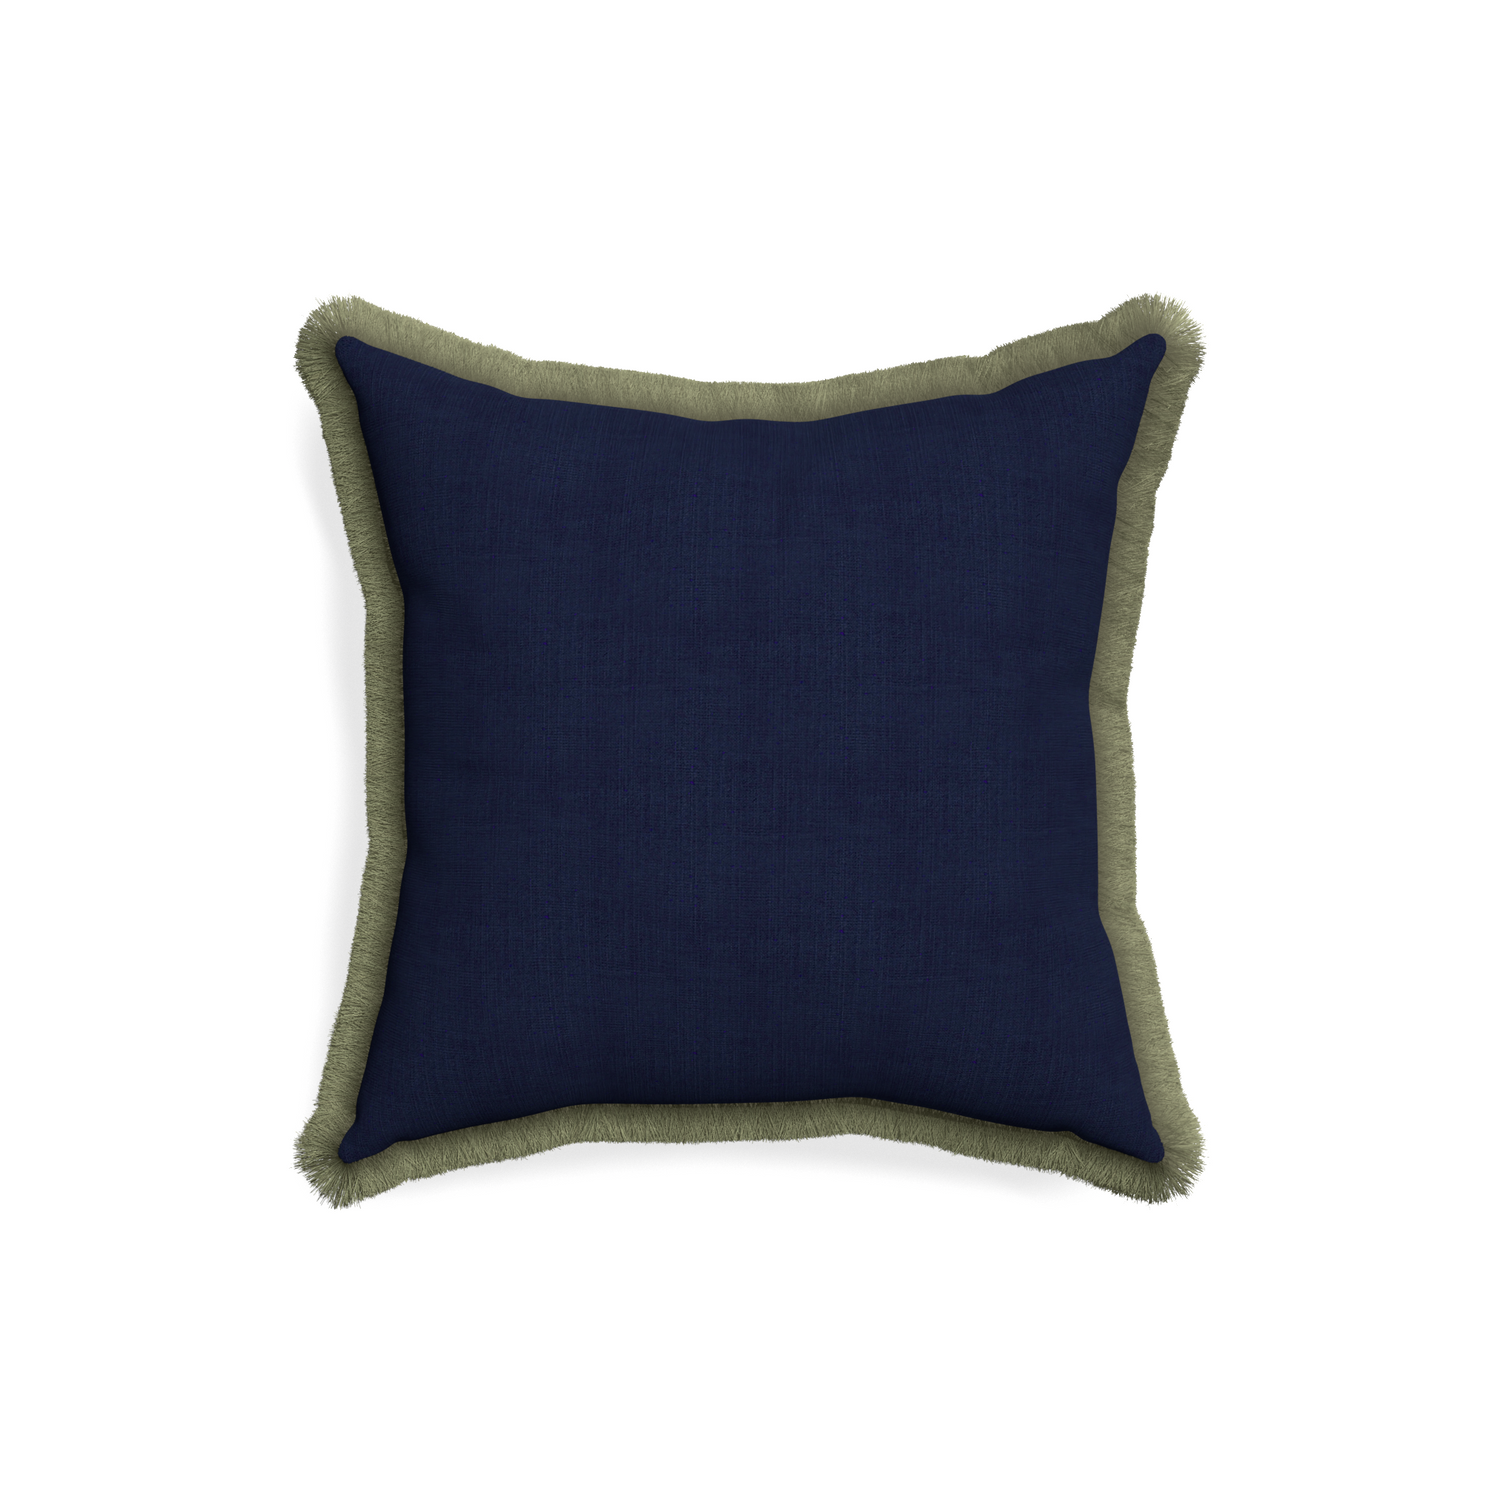 18-square midnight custom navy bluepillow with sage fringe on white background